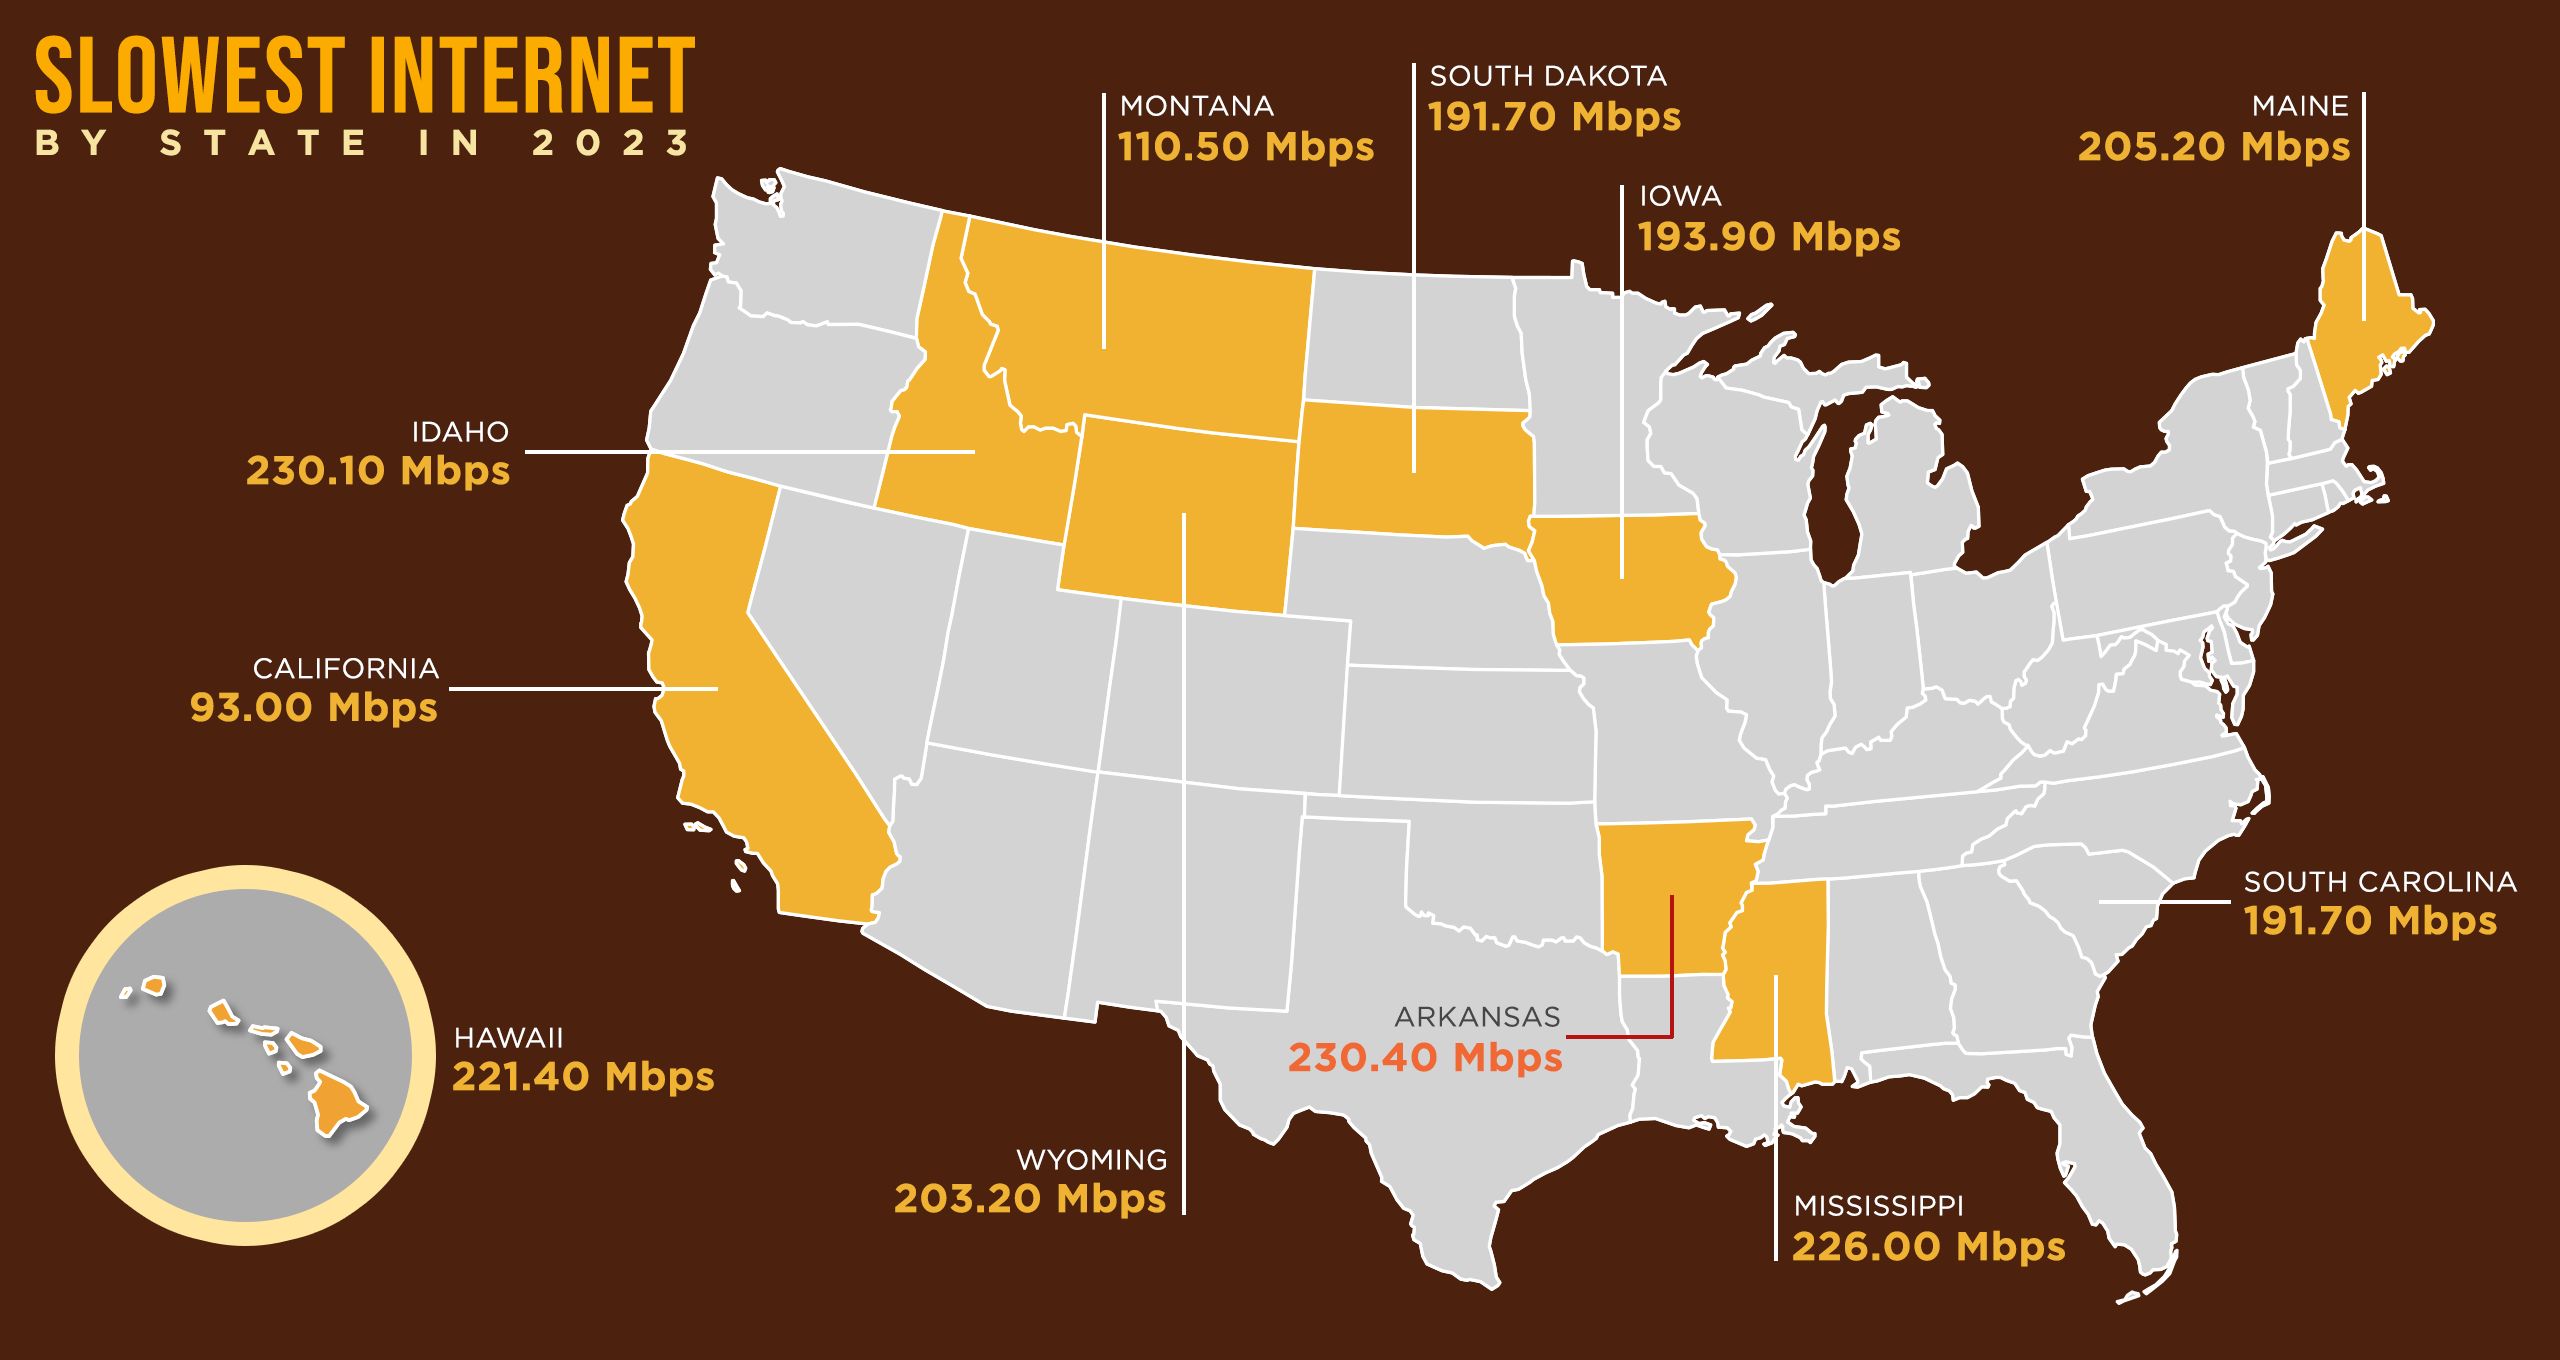 Slowest internet speed by state